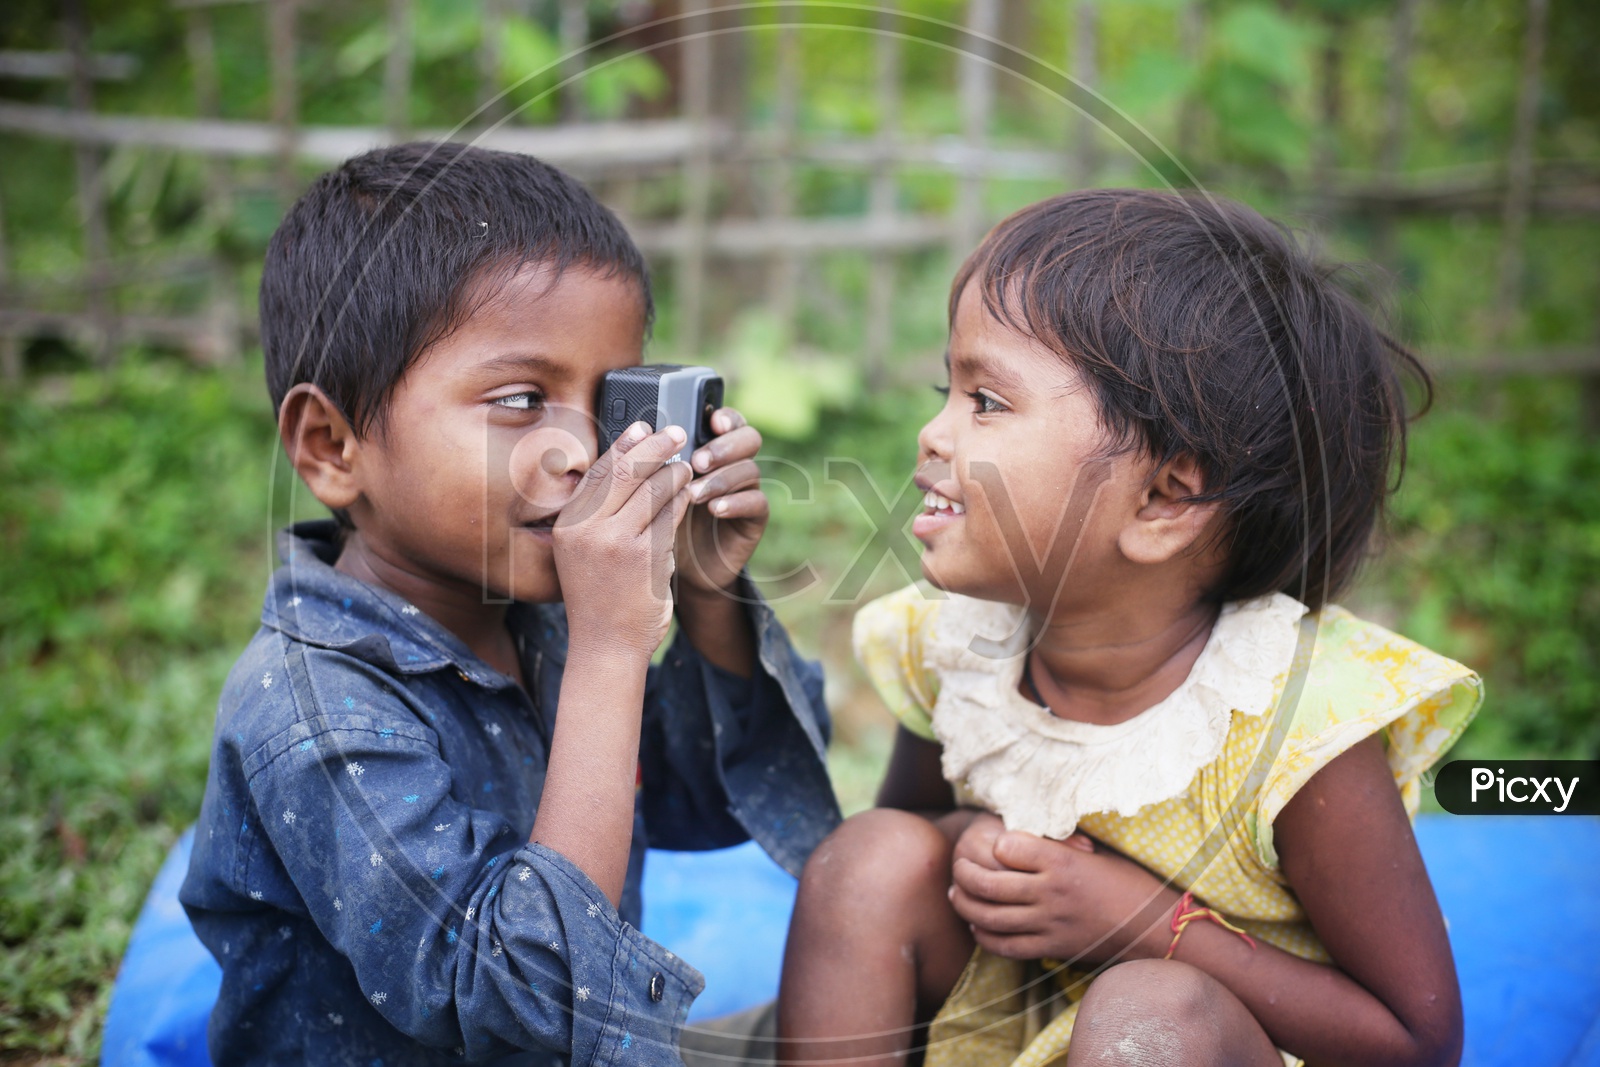 Indian Rural Village Children ( Siblings )  Having Fun With A GoPro Action Camera With a  Smiles On Their  Faces